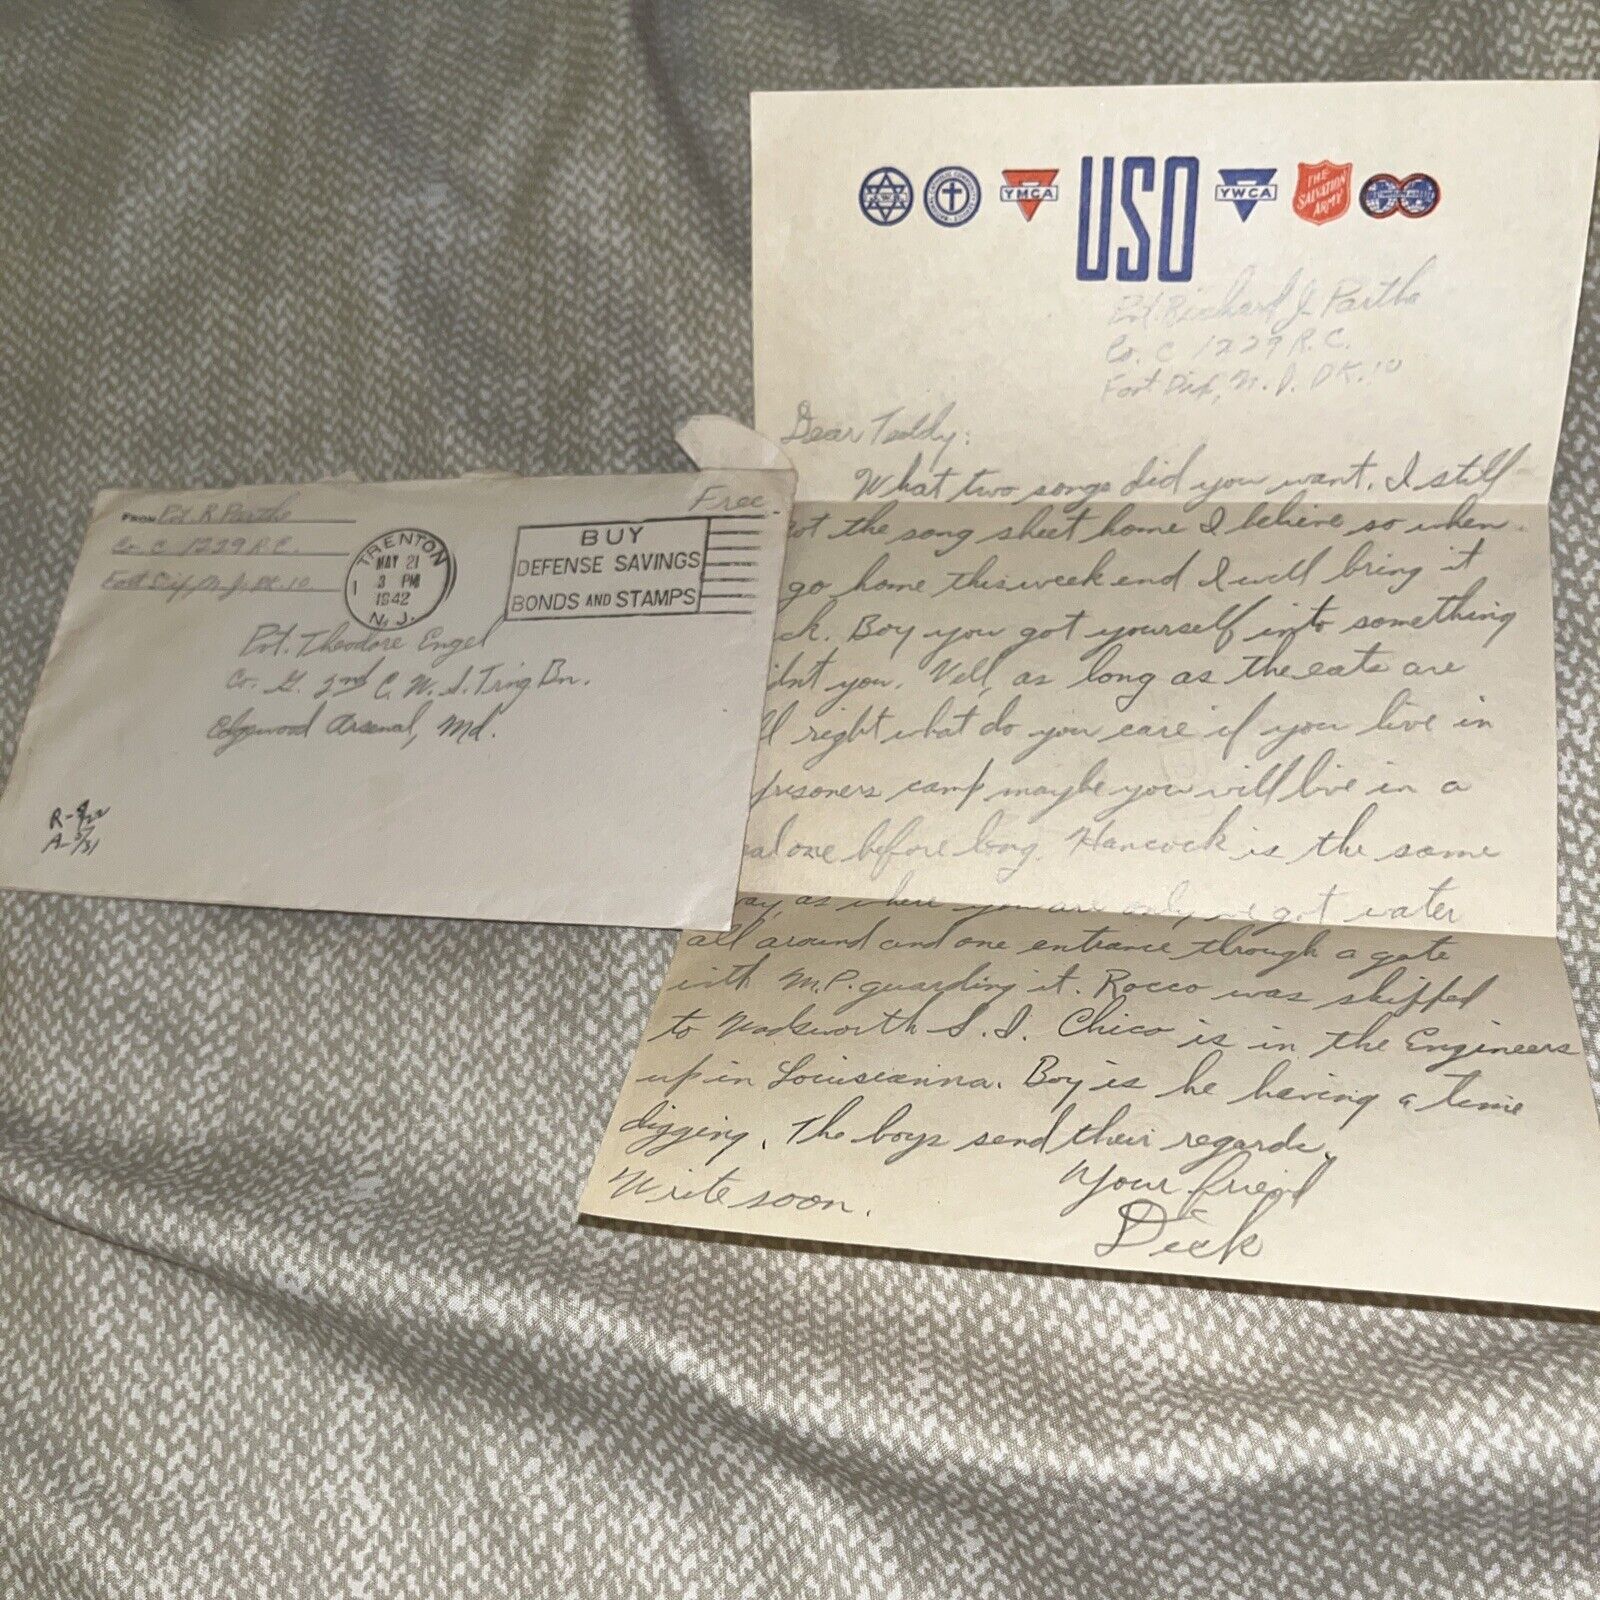 1942 WWII Letter Ft Dix To Edgewood Arsenal MD: USO Letterhead Prisoner’s Camp